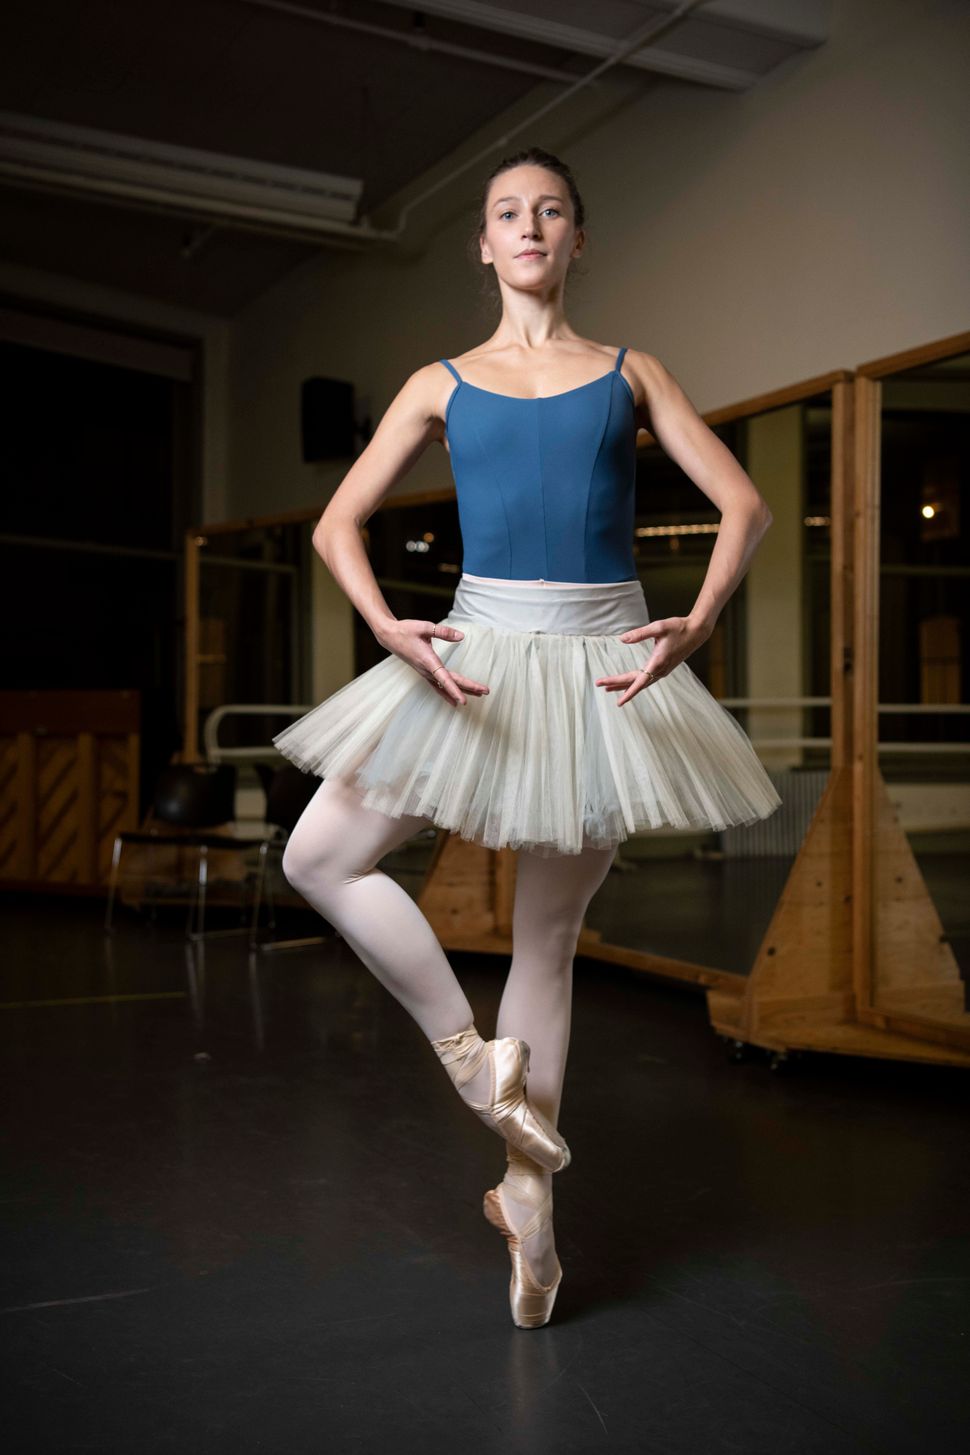 Teuscher poses in her <a href="https://ketodancewear.com/womens/" target="_blank" role="link" class=" js-entry-link cet-external-link" data-vars-item-name="Keto" data-vars-item-type="text" data-vars-unit-name="5db9e7a5e4b066da552b7126" data-vars-unit-type="buzz_body" data-vars-target-content-id="https://ketodancewear.com/womens/" data-vars-target-content-type="url" data-vars-type="web_external_link" data-vars-subunit-name="article_body" data-vars-subunit-type="component" data-vars-position-in-subunit="11">Keto</a> leotard, <a href="https://www.capezio.com/women/tights" target="_blank" role="link" class=" js-entry-link cet-external-link" data-vars-item-name="Capezio pink tights" data-vars-item-type="text" data-vars-unit-name="5db9e7a5e4b066da552b7126" data-vars-unit-type="buzz_body" data-vars-target-content-id="https://www.capezio.com/women/tights" data-vars-target-content-type="url" data-vars-type="web_external_link" data-vars-subunit-name="article_body" data-vars-subunit-type="component" data-vars-position-in-subunit="12">Capezio pink tights</a>, <a href="http://us.blochworld.com/product/S0104L" target="_blank" role="link" class=" js-entry-link cet-external-link" data-vars-item-name="Bloch Alpha pointe shoes" data-vars-item-type="text" data-vars-unit-name="5db9e7a5e4b066da552b7126" data-vars-unit-type="buzz_body" data-vars-target-content-id="http://us.blochworld.com/product/S0104L" data-vars-target-content-type="url" data-vars-type="web_external_link" data-vars-subunit-name="article_body" data-vars-subunit-type="component" data-vars-position-in-subunit="13">Bloch Alpha pointe shoes</a> and a practice tutu that was handed down to her by fellow principal <a href="https://www.abt.org/people/gillian-murphy/" target="_blank" role="link" class=" js-entry-link cet-external-link" data-vars-item-name="Gillian Murphy " data-vars-item-type="text" data-vars-unit-name="5db9e7a5e4b066da552b7126" data-vars-unit-type="buzz_body" data-vars-target-content-id="https://www.abt.org/people/gillian-murphy/" data-vars-target-content-type="url" data-vars-type="web_external_link" data-vars-subunit-name="article_body" data-vars-subunit-type="component" data-vars-position-in-subunit="14">Gillian Murphy </a>.